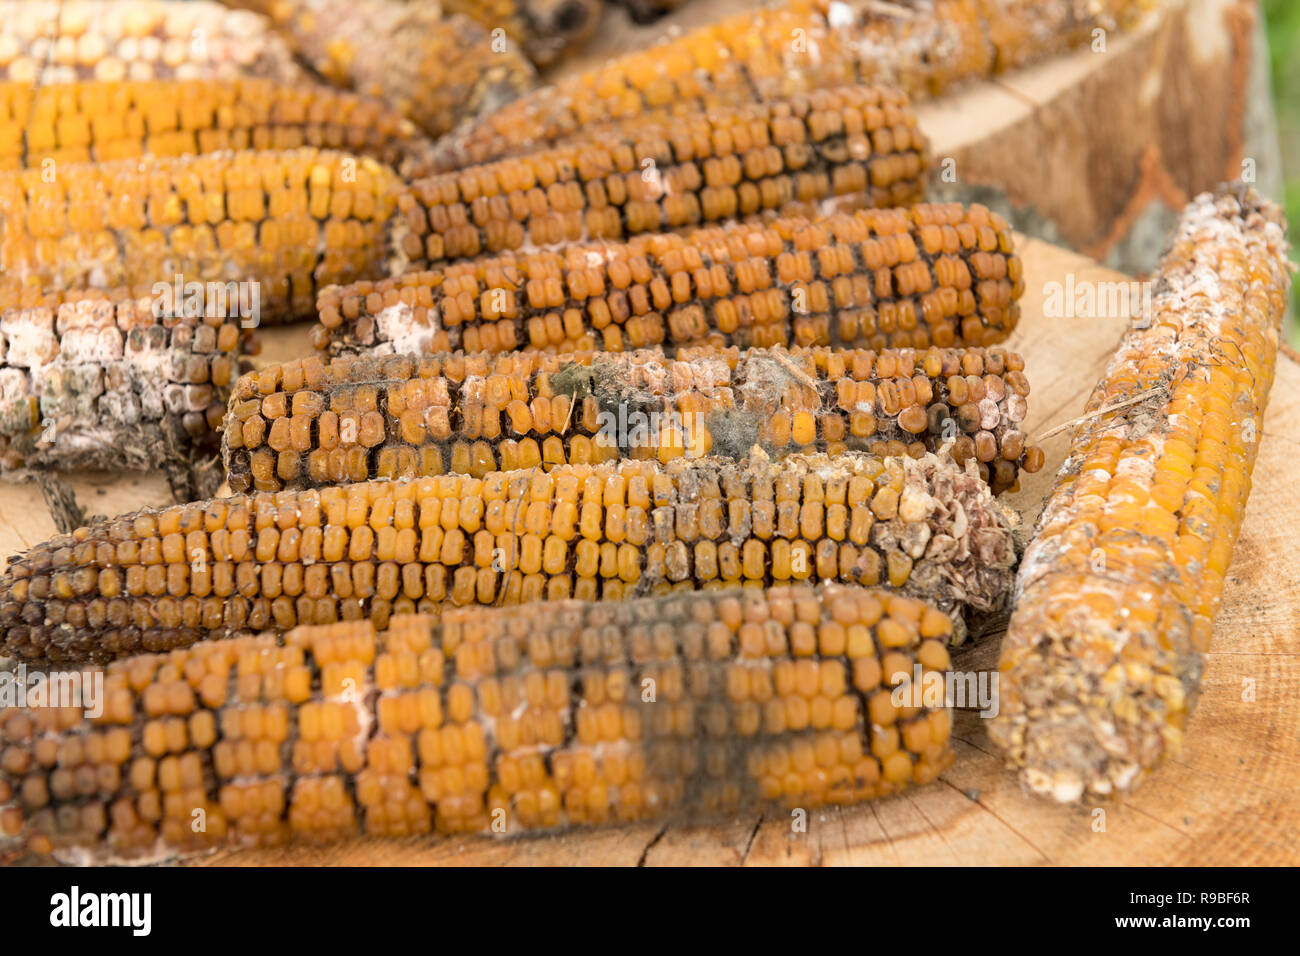 Moldy rotten corn cobs outside on wood logs. Stock Photo